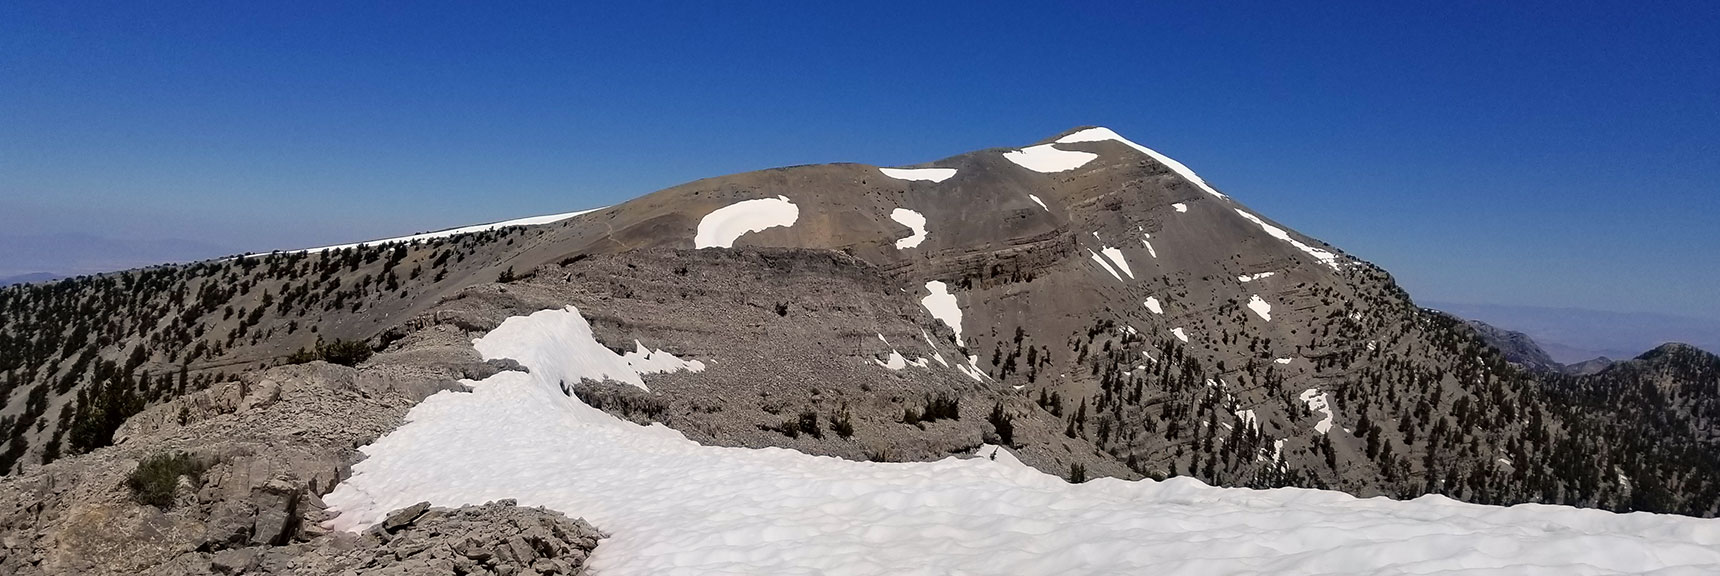 View of Charleston Peak from Saddle About 2 Miles Below